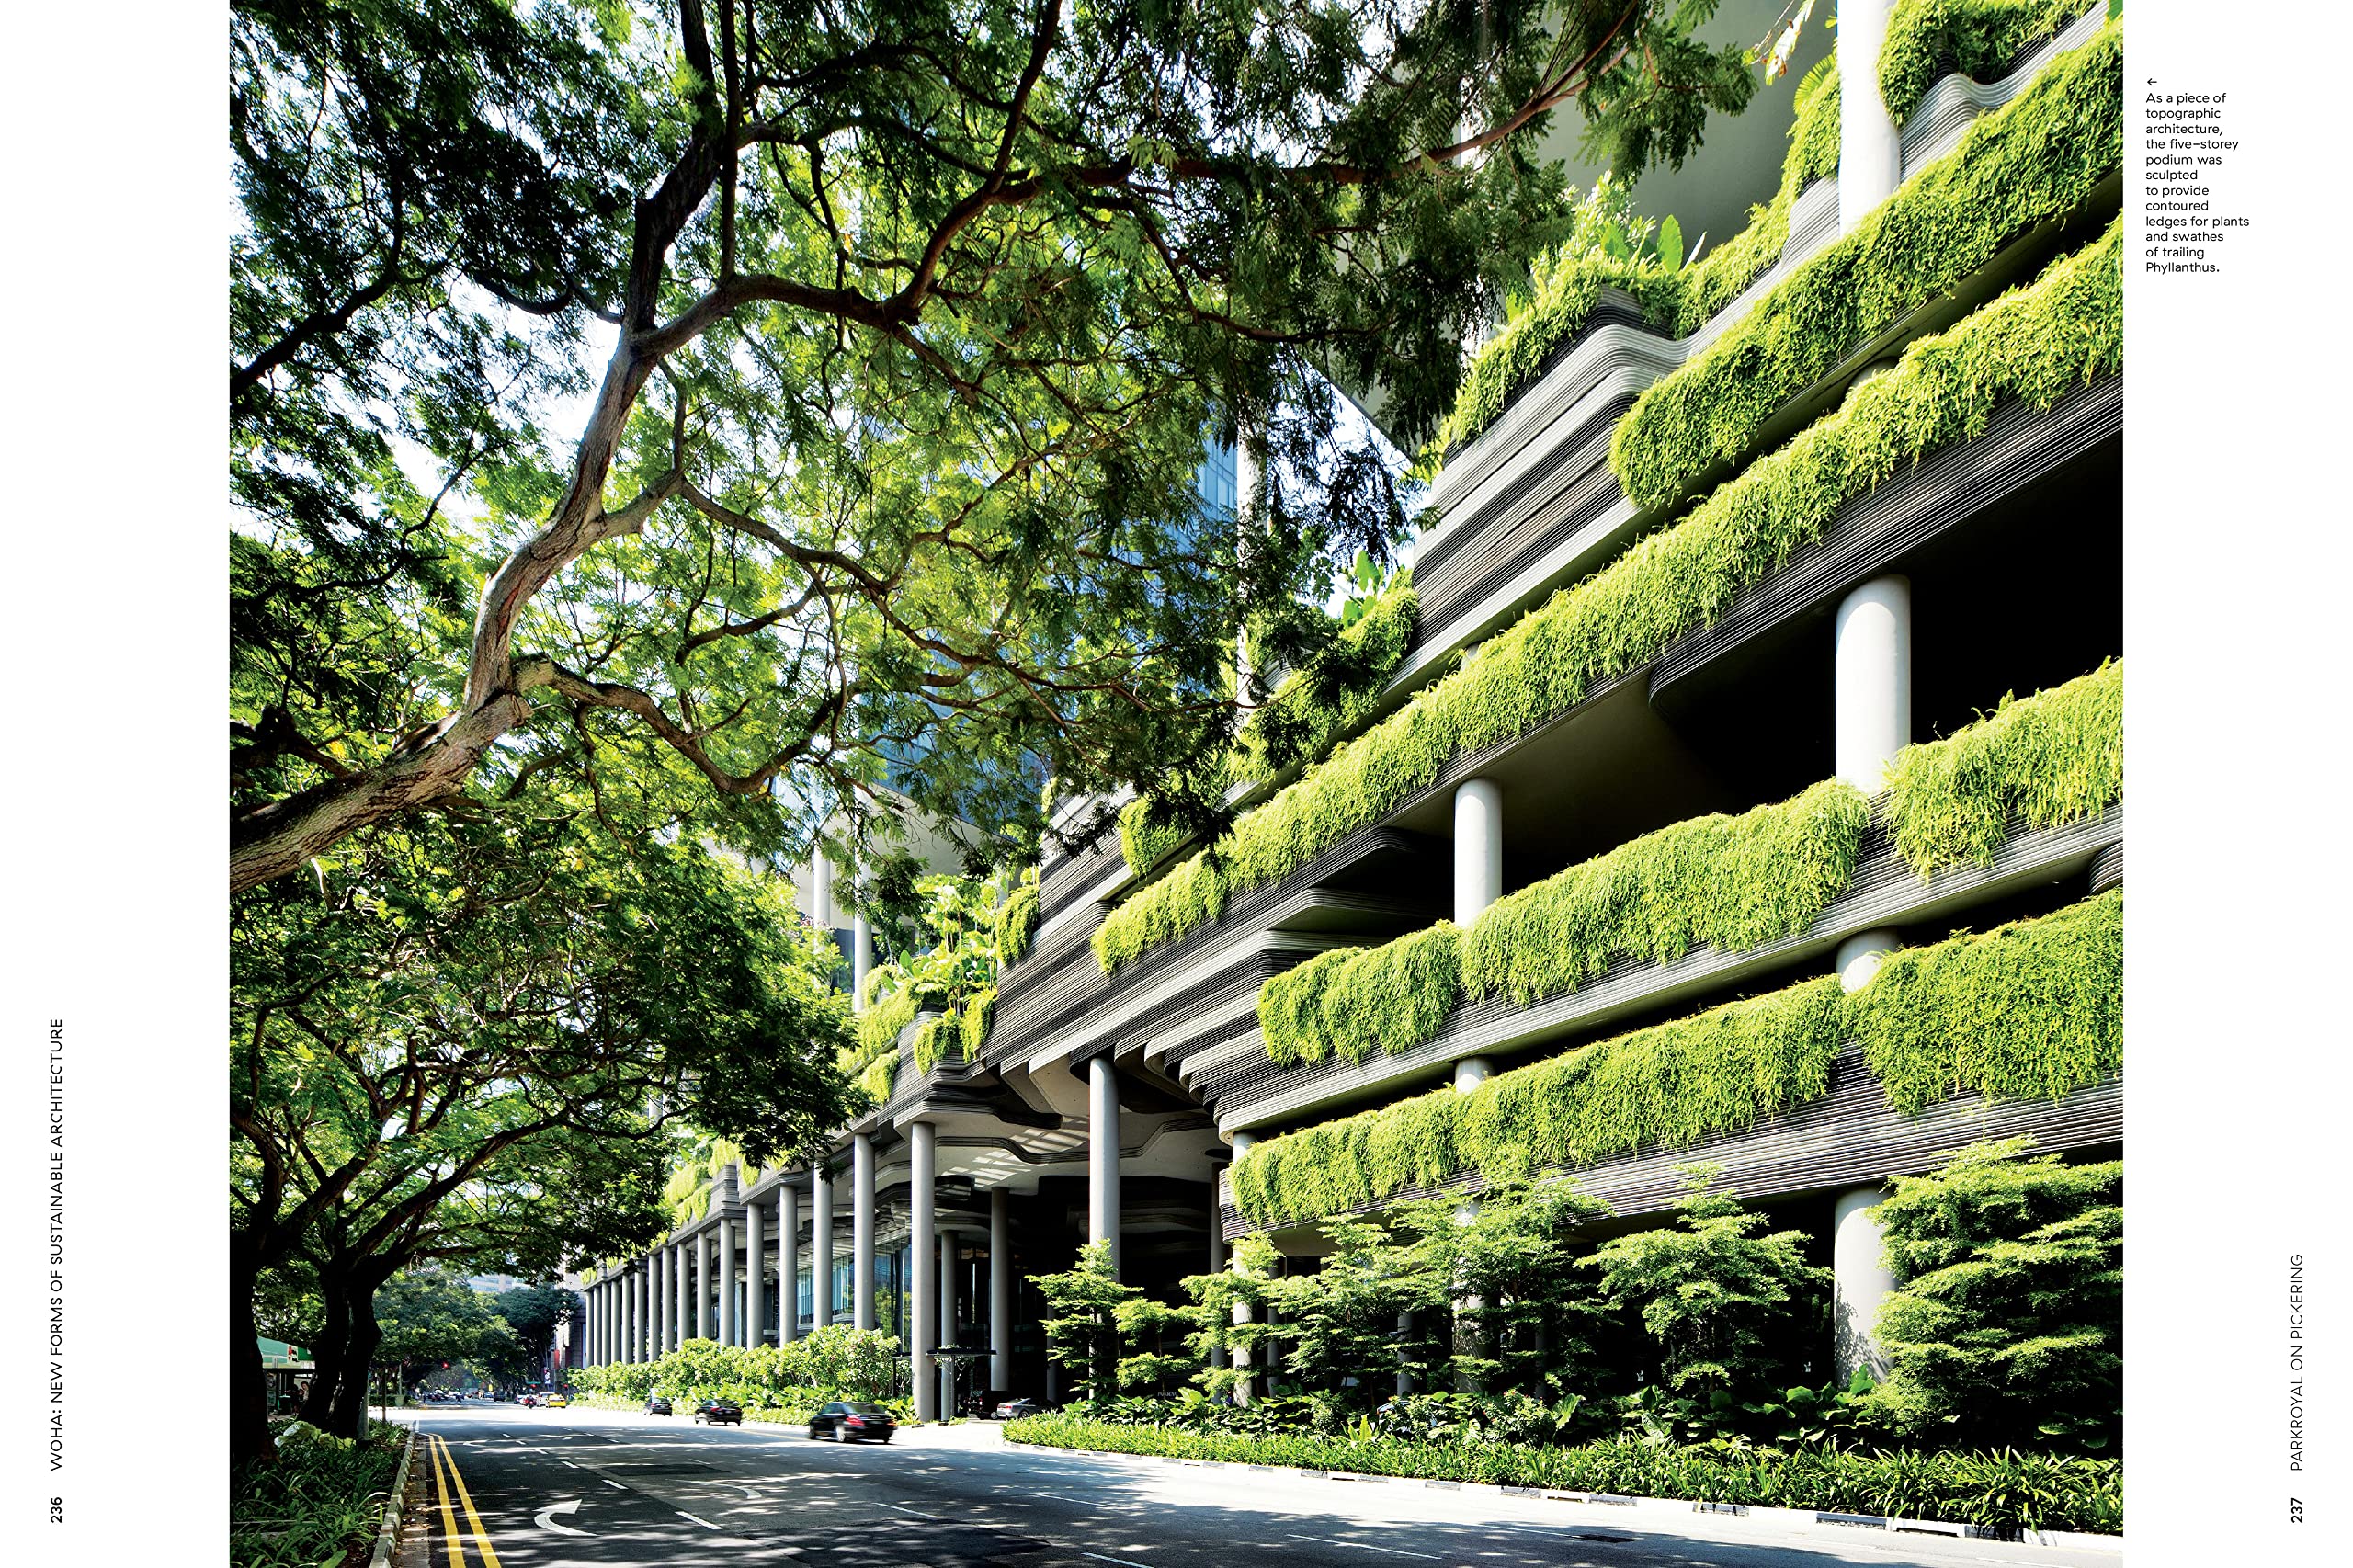 New Forms of Sustainable Architecture